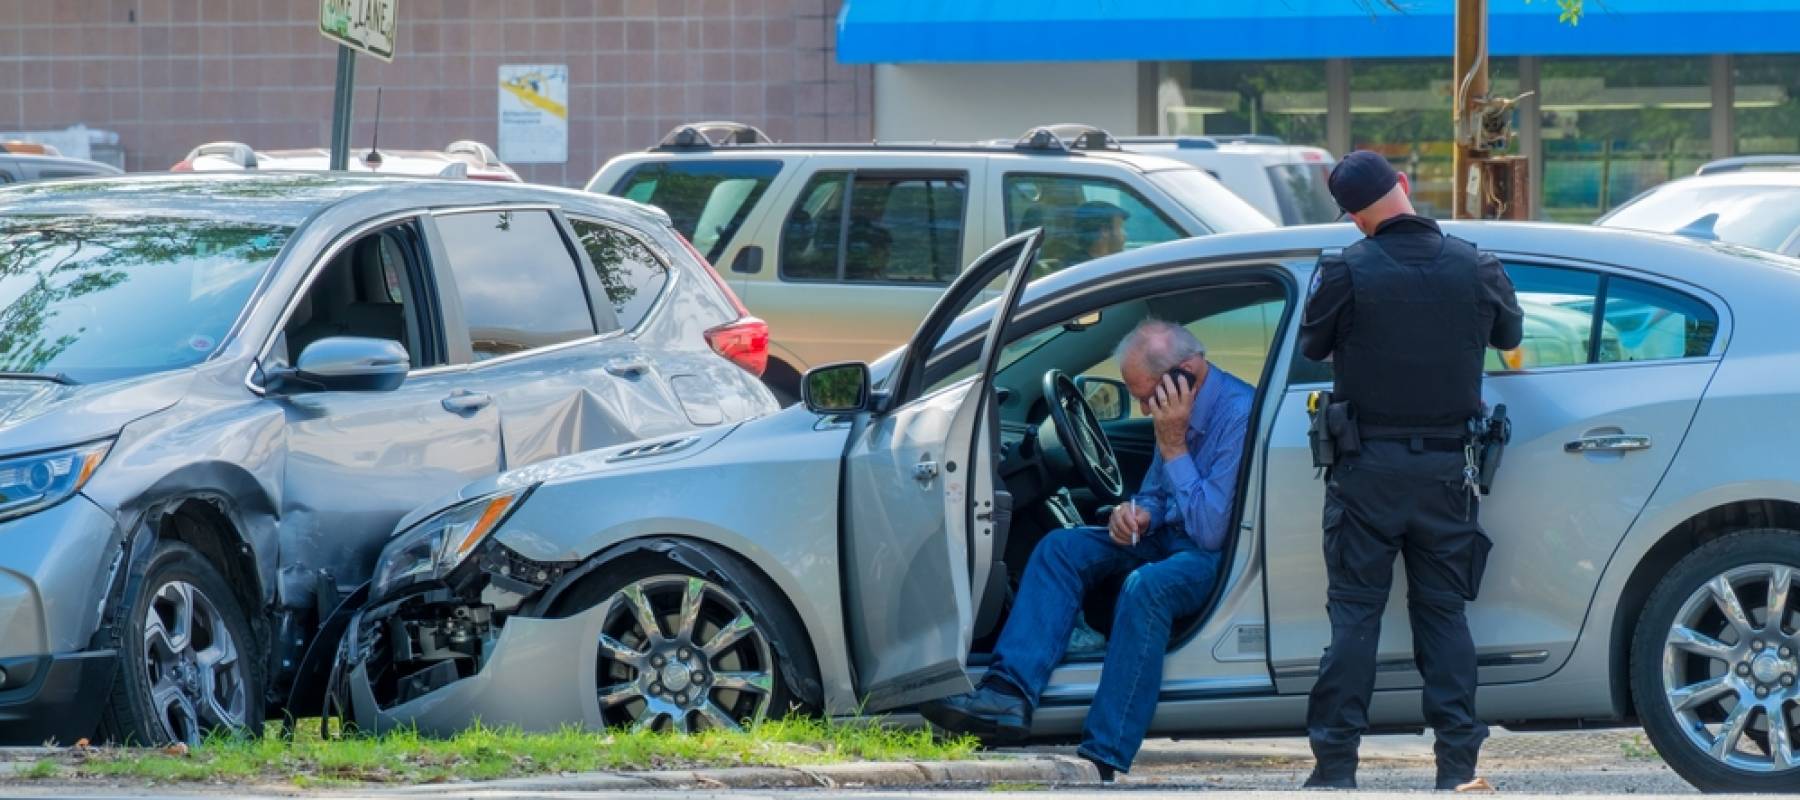 Car accident scene with damaged cars, policeman writing traffic ticket and driver on cell phone.